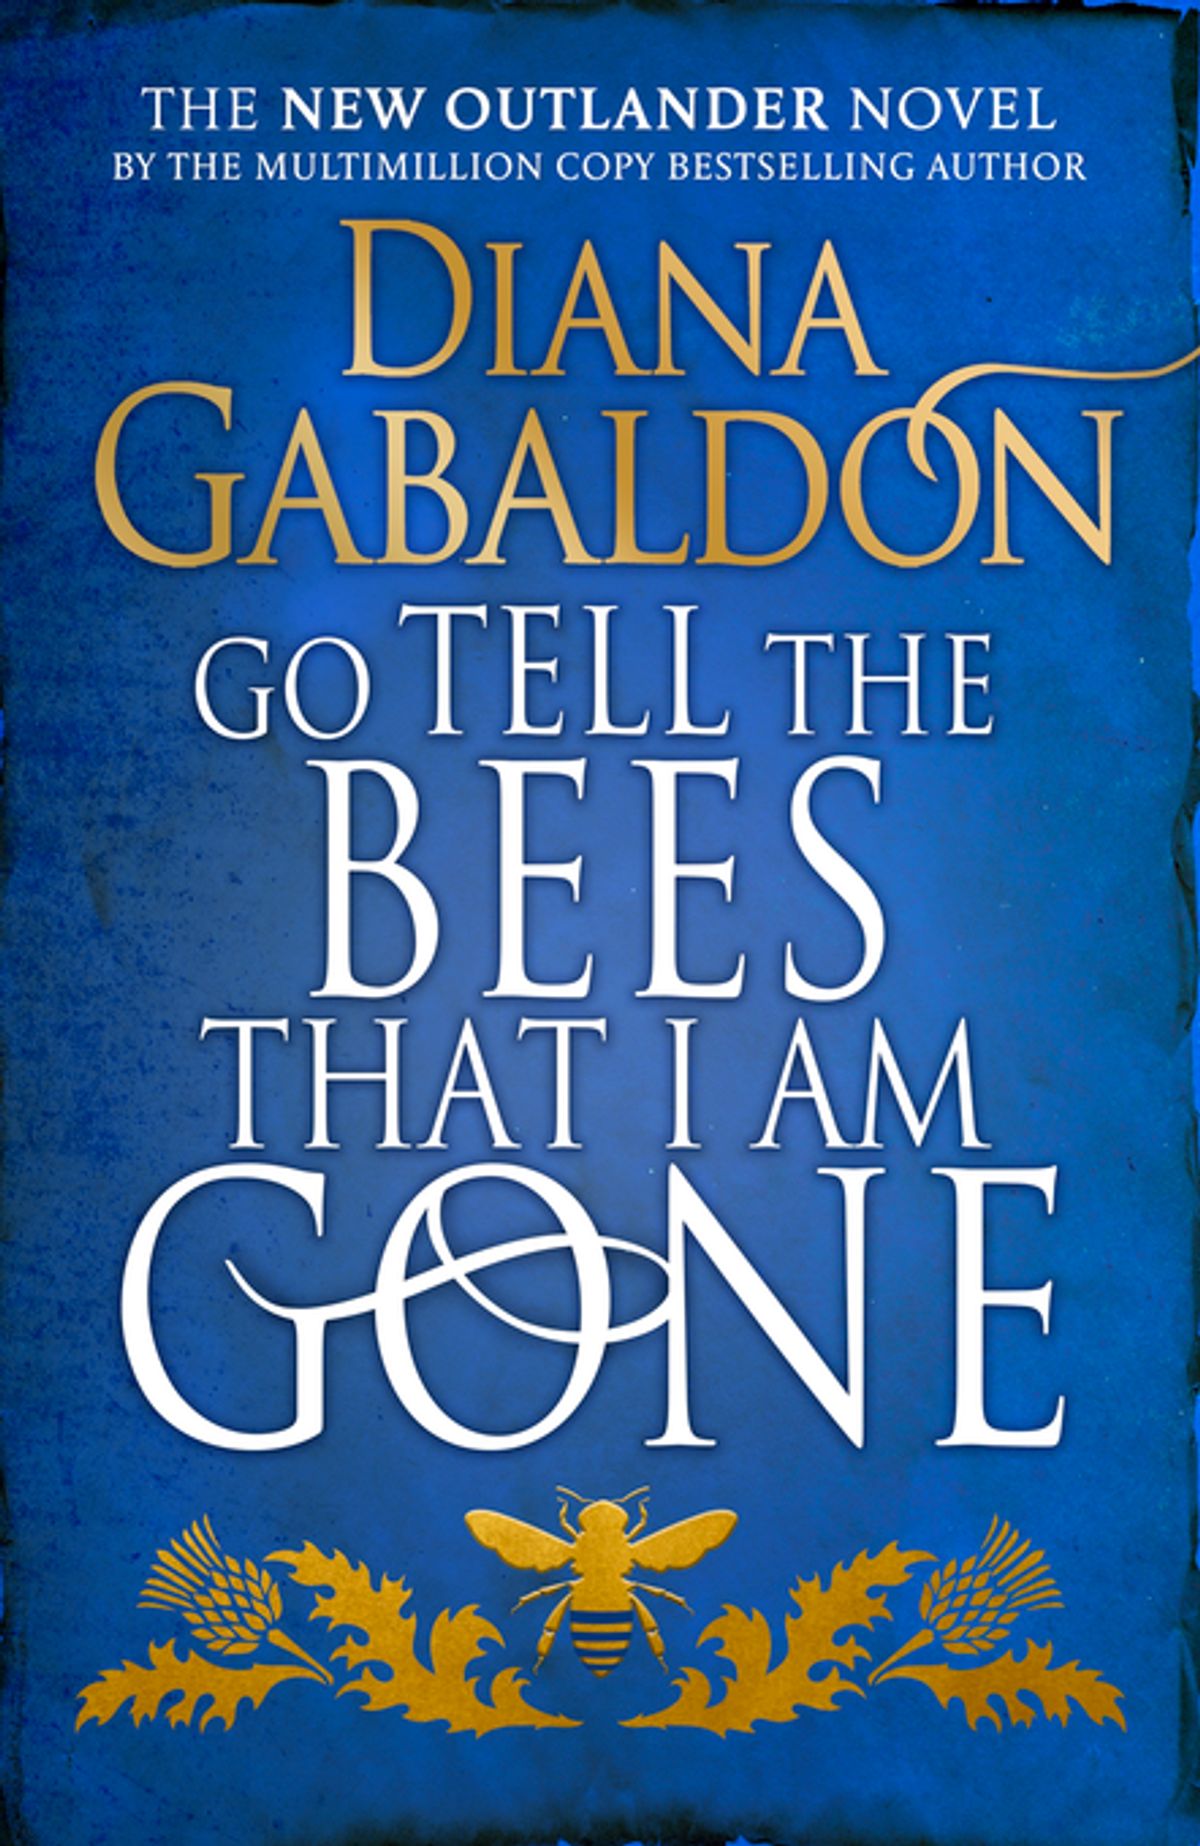 Go Tell the Bees That I Am Gone by Diana Galbaldon